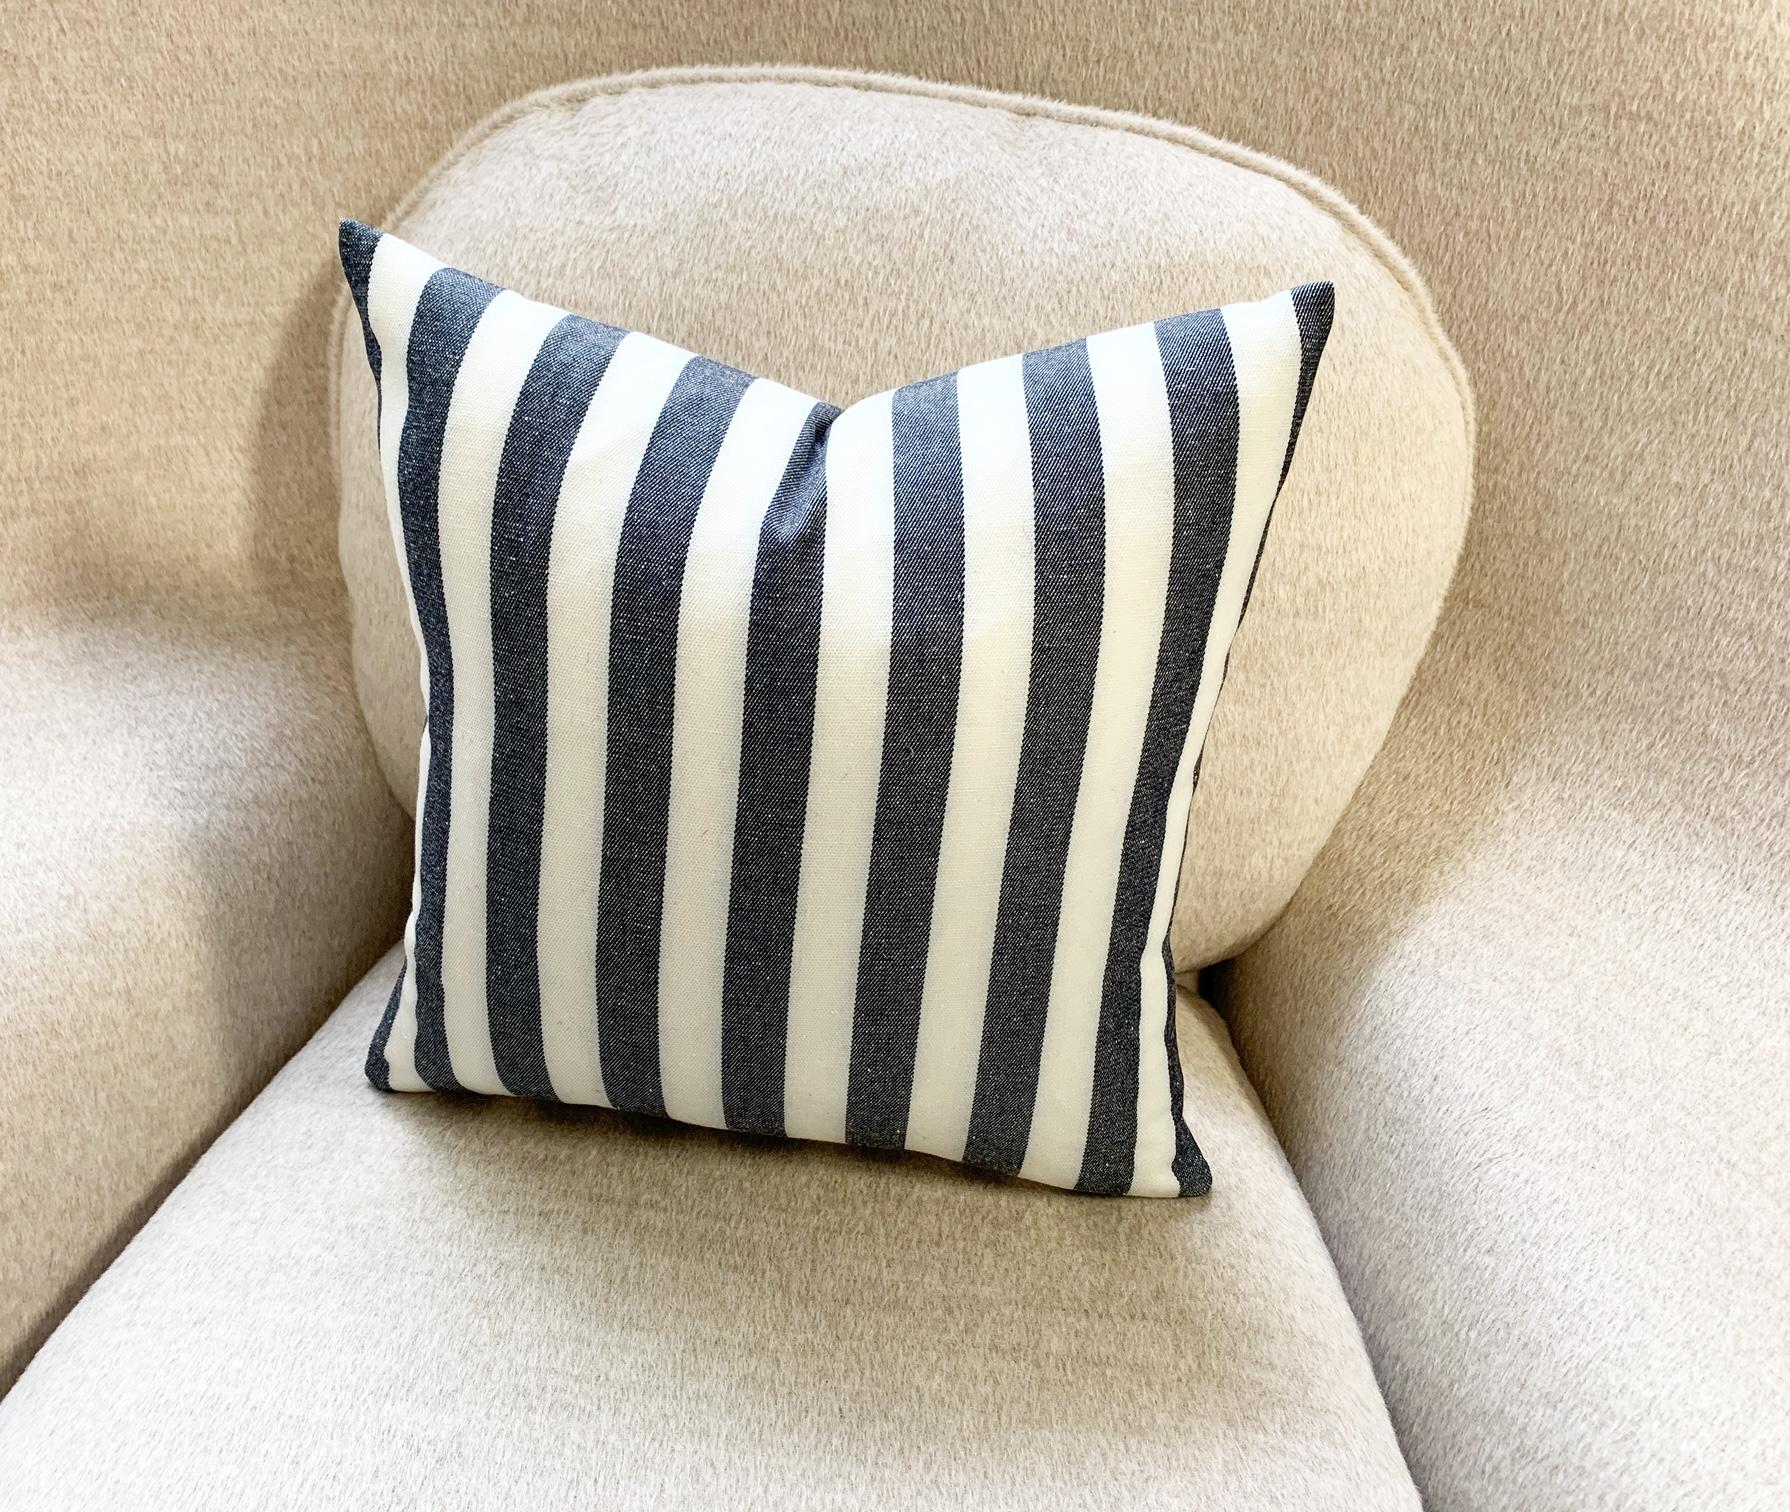 Kule's incredibly chic stripe fabric was used to make this beautiful pillow crafted in our Saint Louis studio. Down feather insert included. Measures: 14